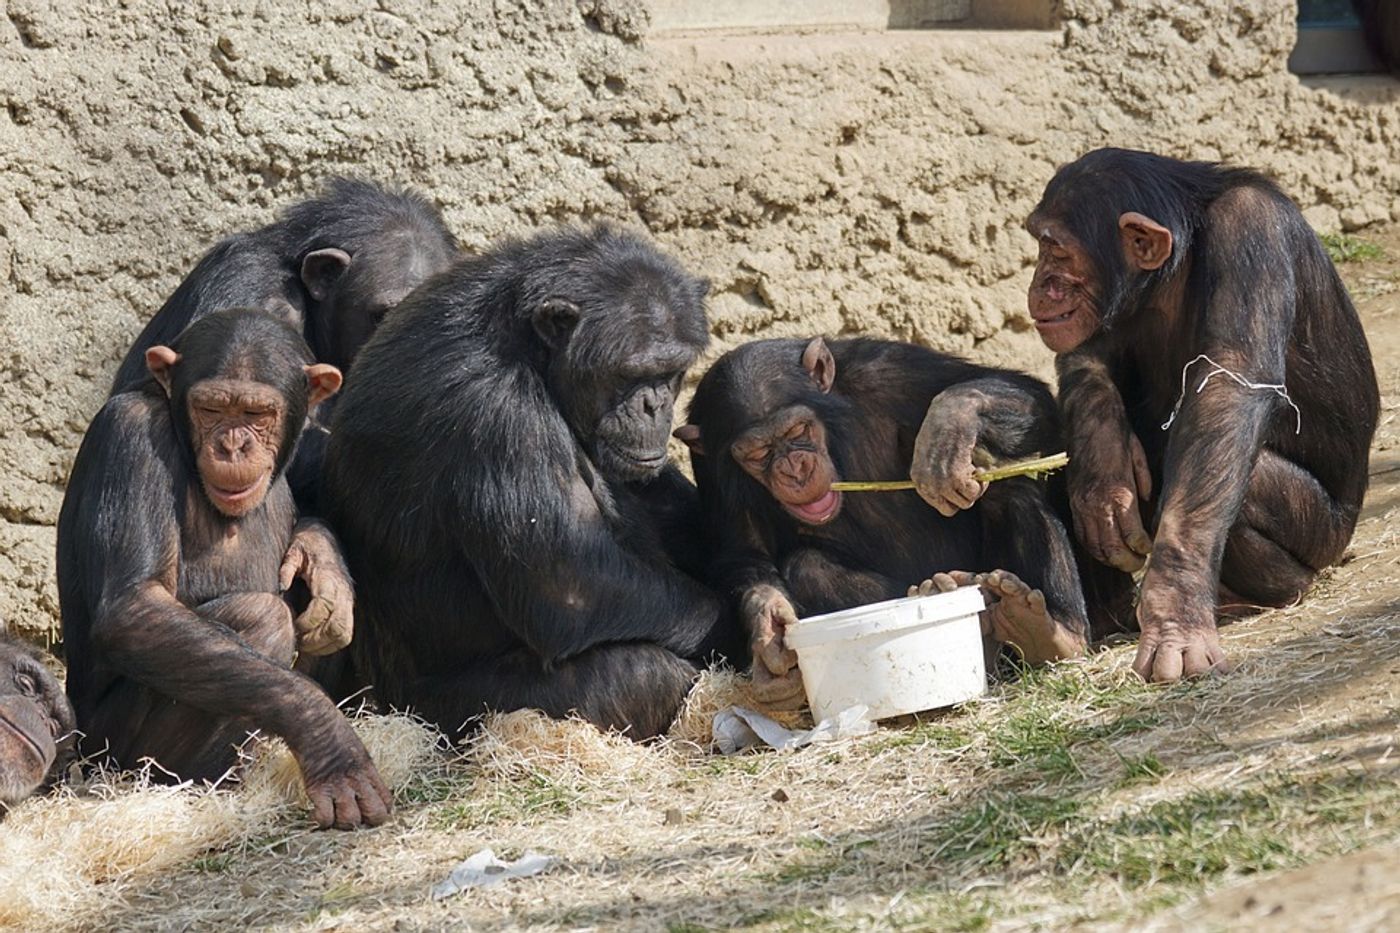 Chimpanzees eating together.